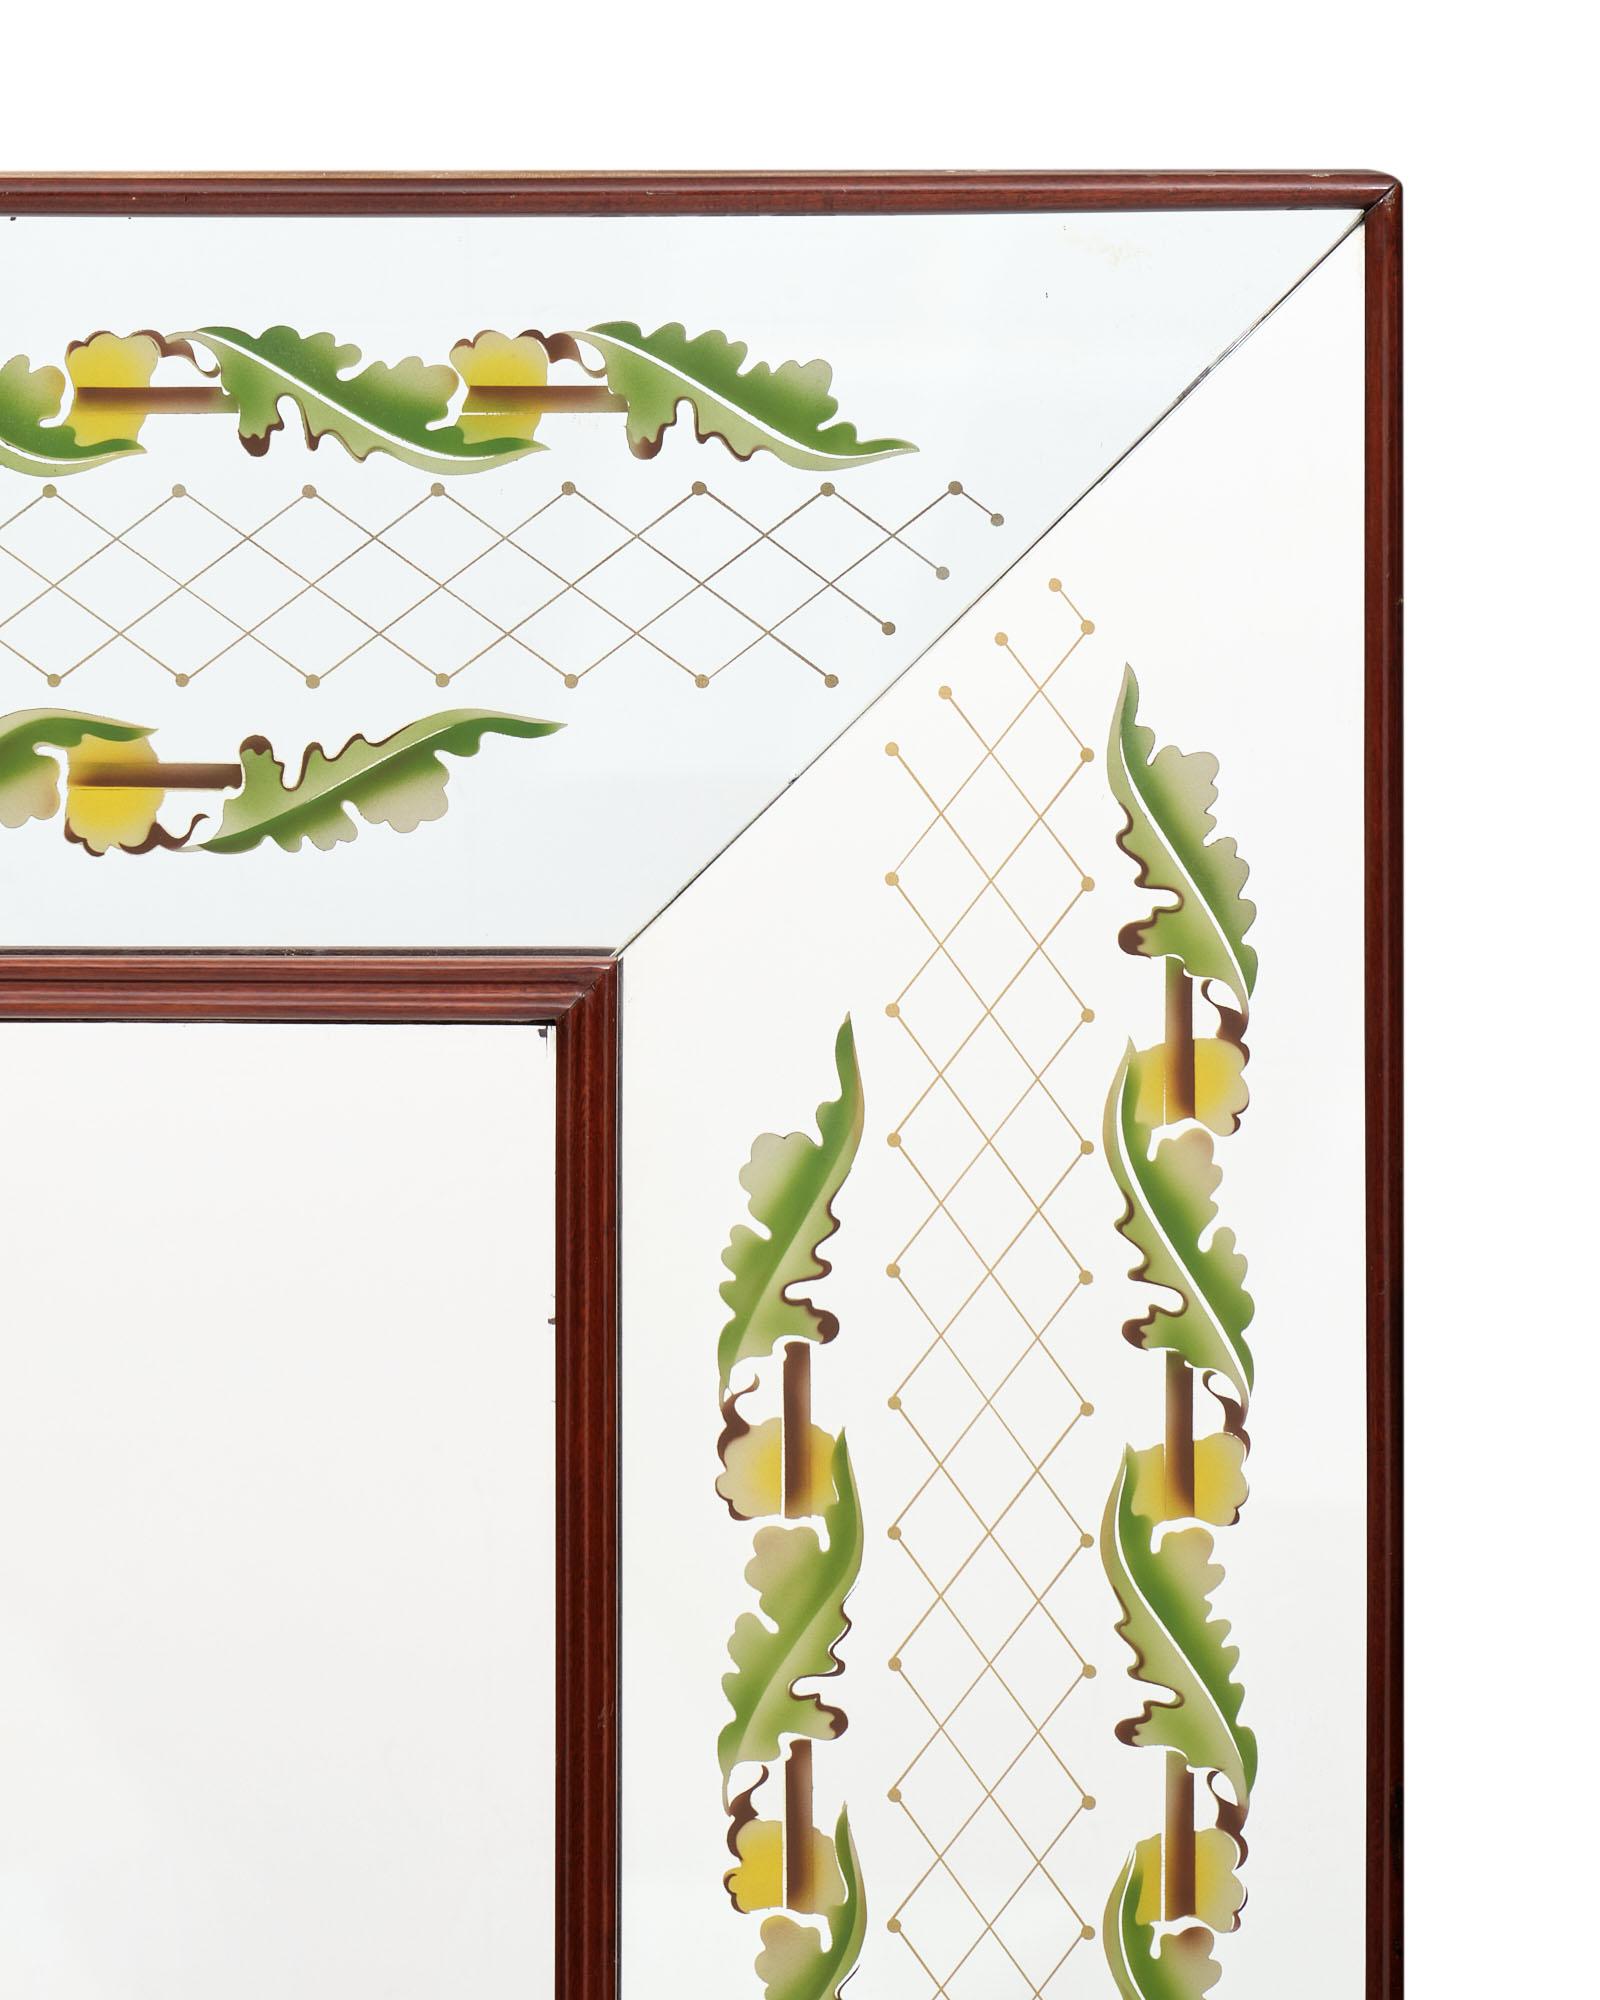 Italian eglomised mirror by Lugigi Brussotti. This mirror has freezes of stylized oak leaves. This mirror includes a lighting features which appears though the mirror near the eglomised decor.